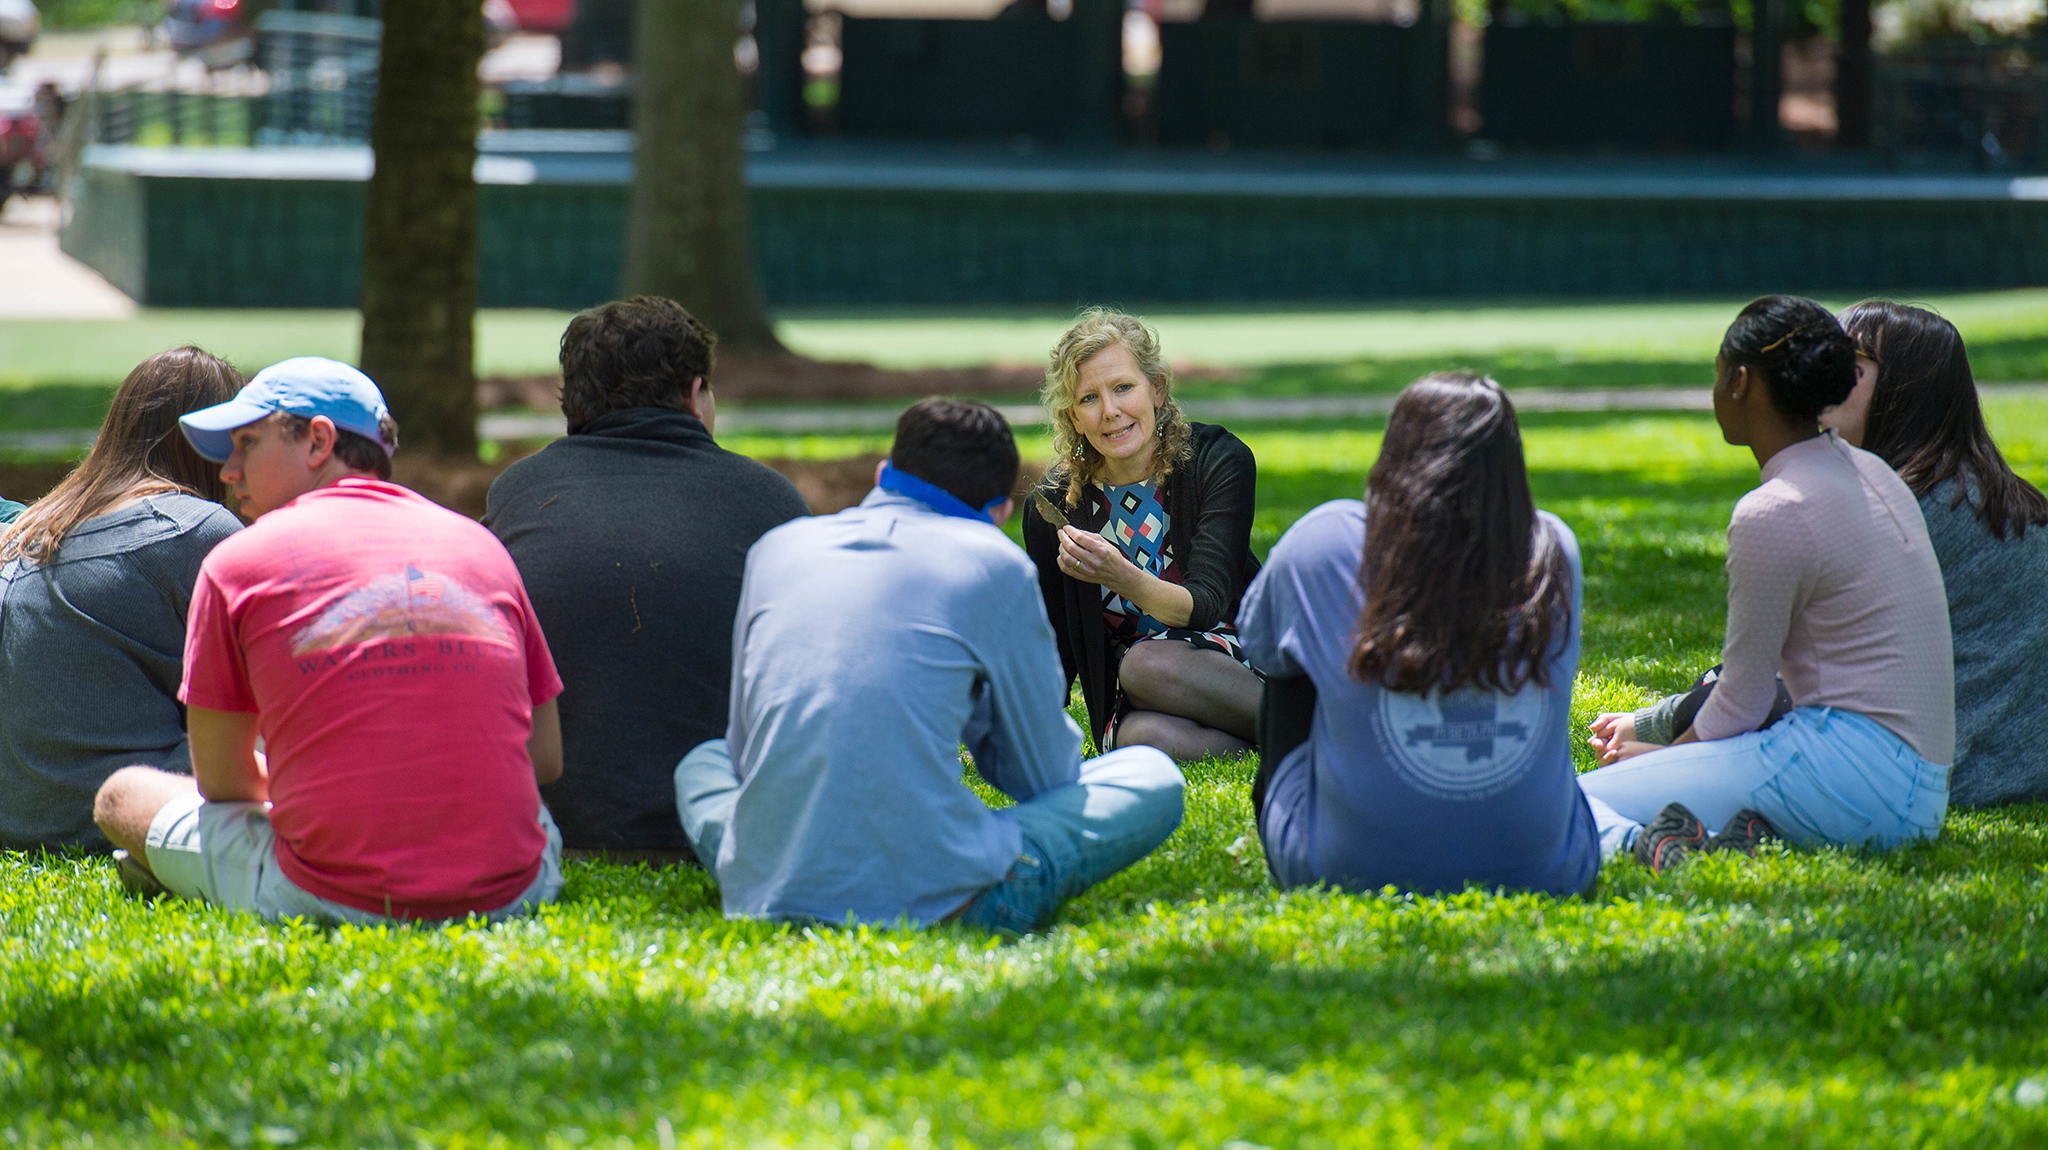 Professor Katie McKee and a group of 7 honors English students sit on the grass in the Grove, having a discussion together